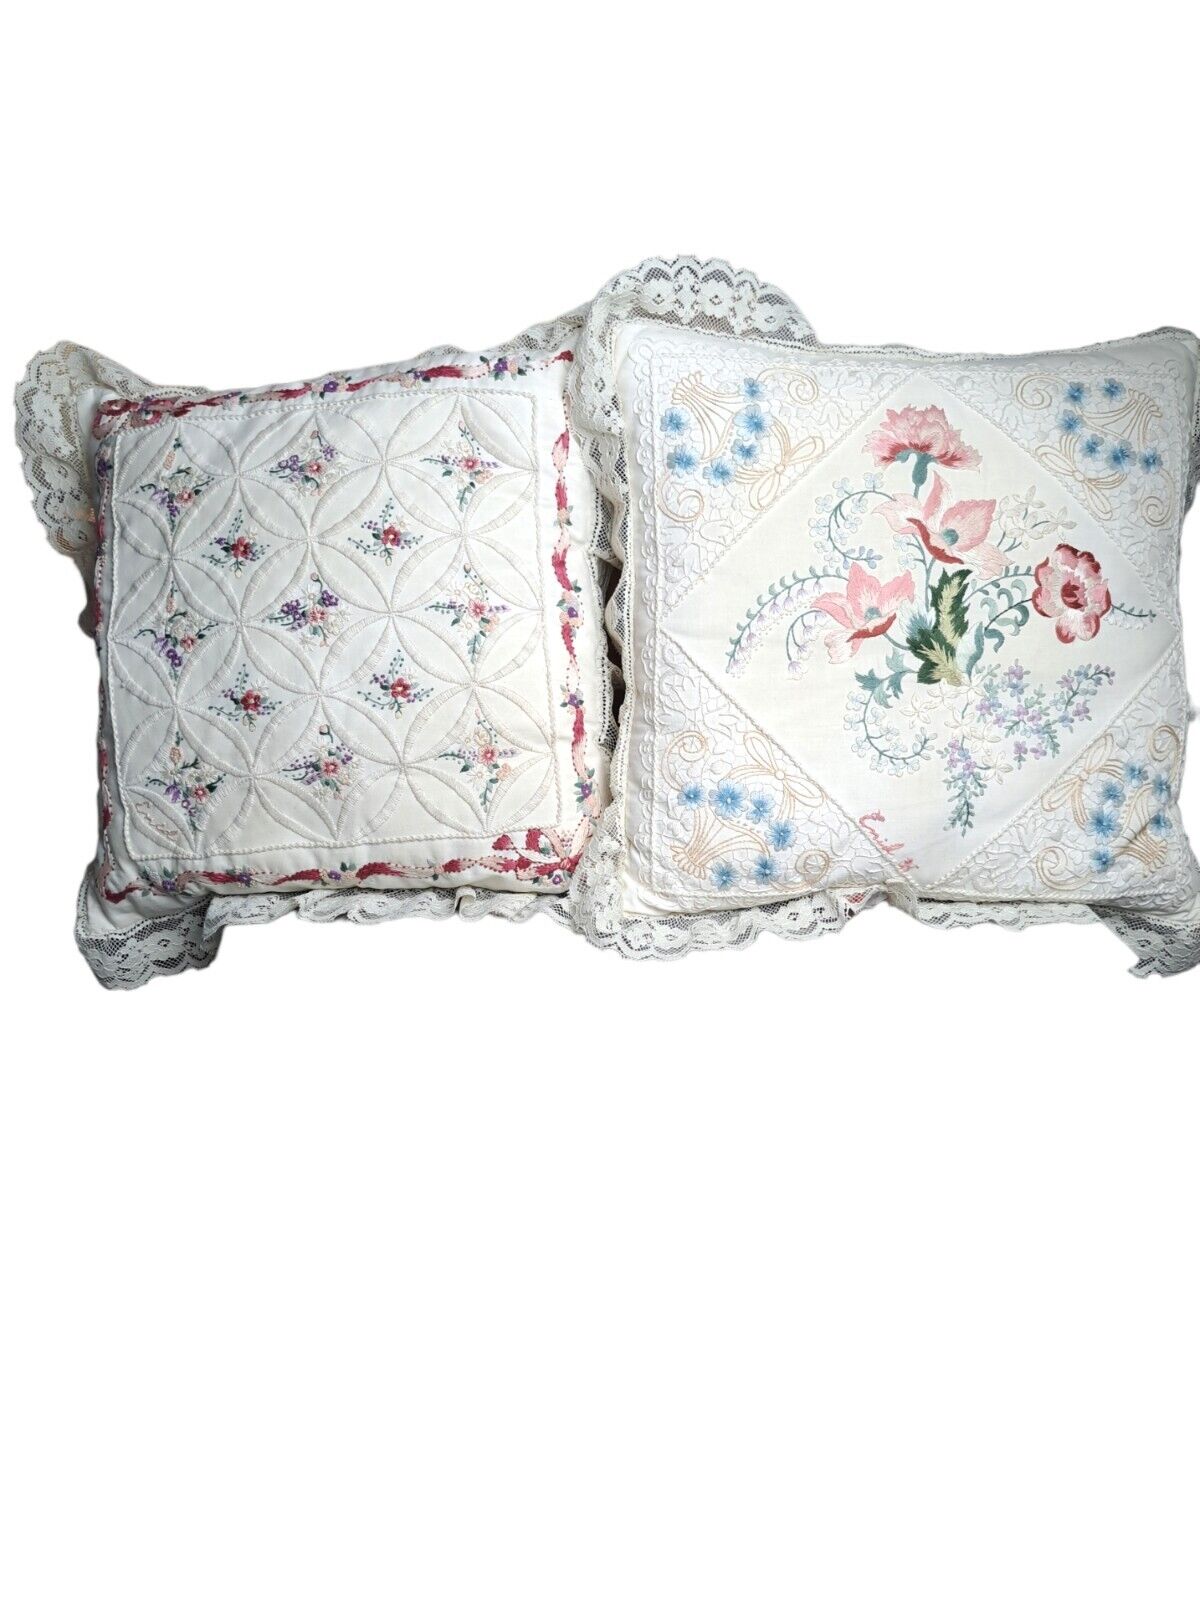 Vintage Pair Hand Embroidered Floral Throw Pillows~Lace Edges~Signed